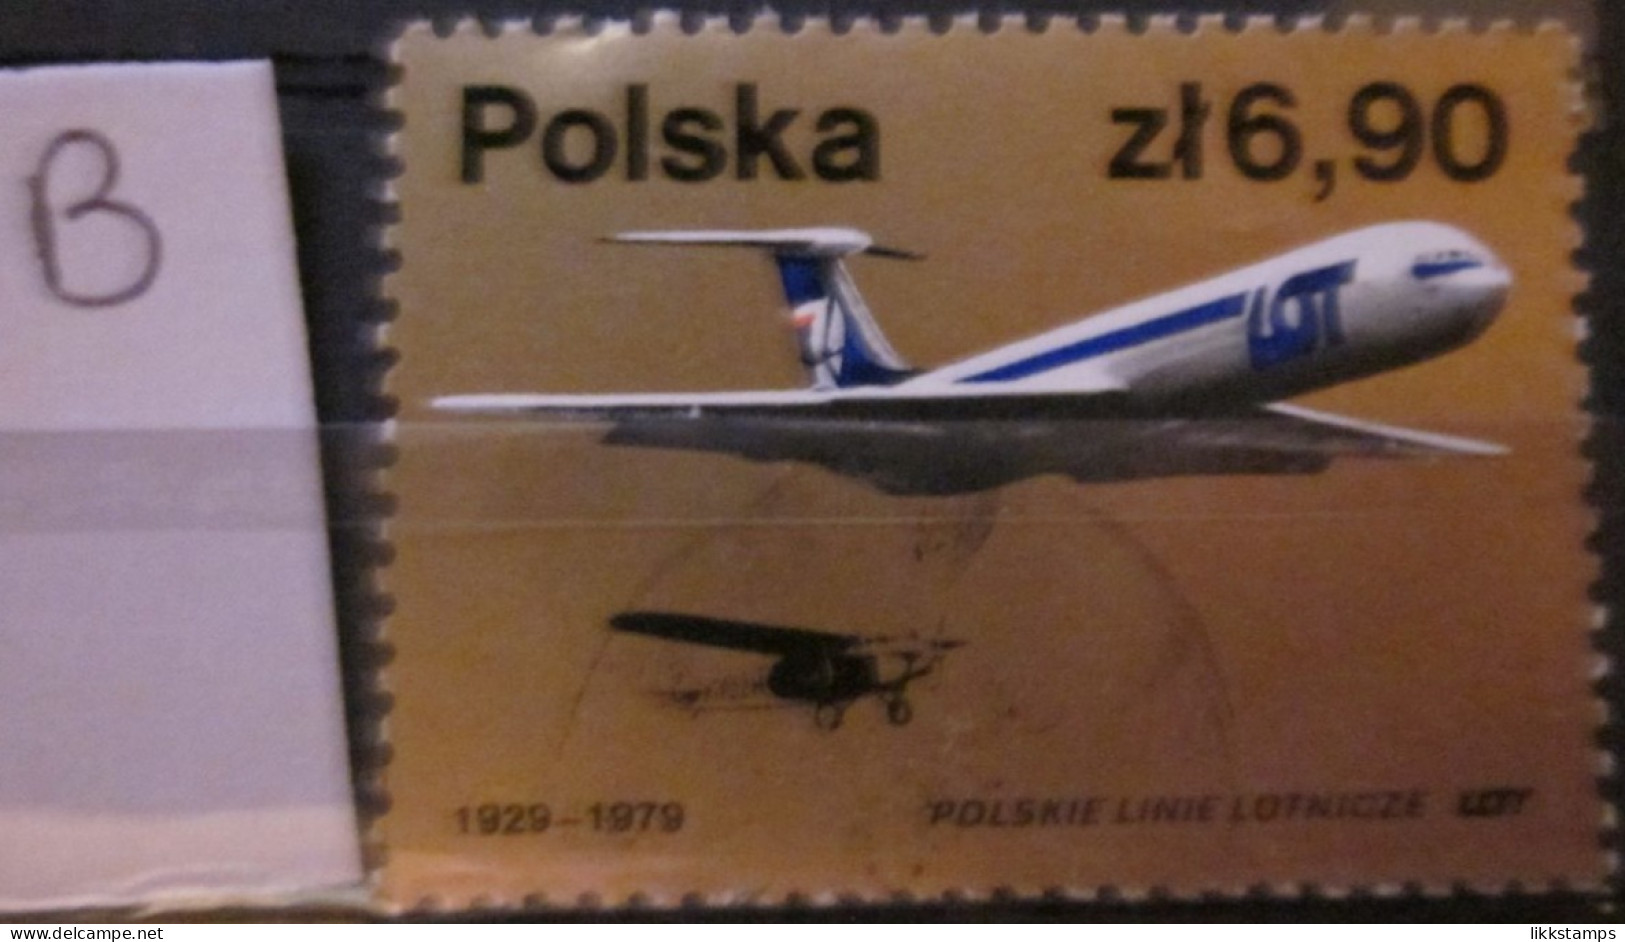 POLAND ~ 1979 ~ S.G. NUMBERS S.G. 2590. ~ 'LOT B' ~ AIRCRAFT ~ VFU #03521 - Used Stamps